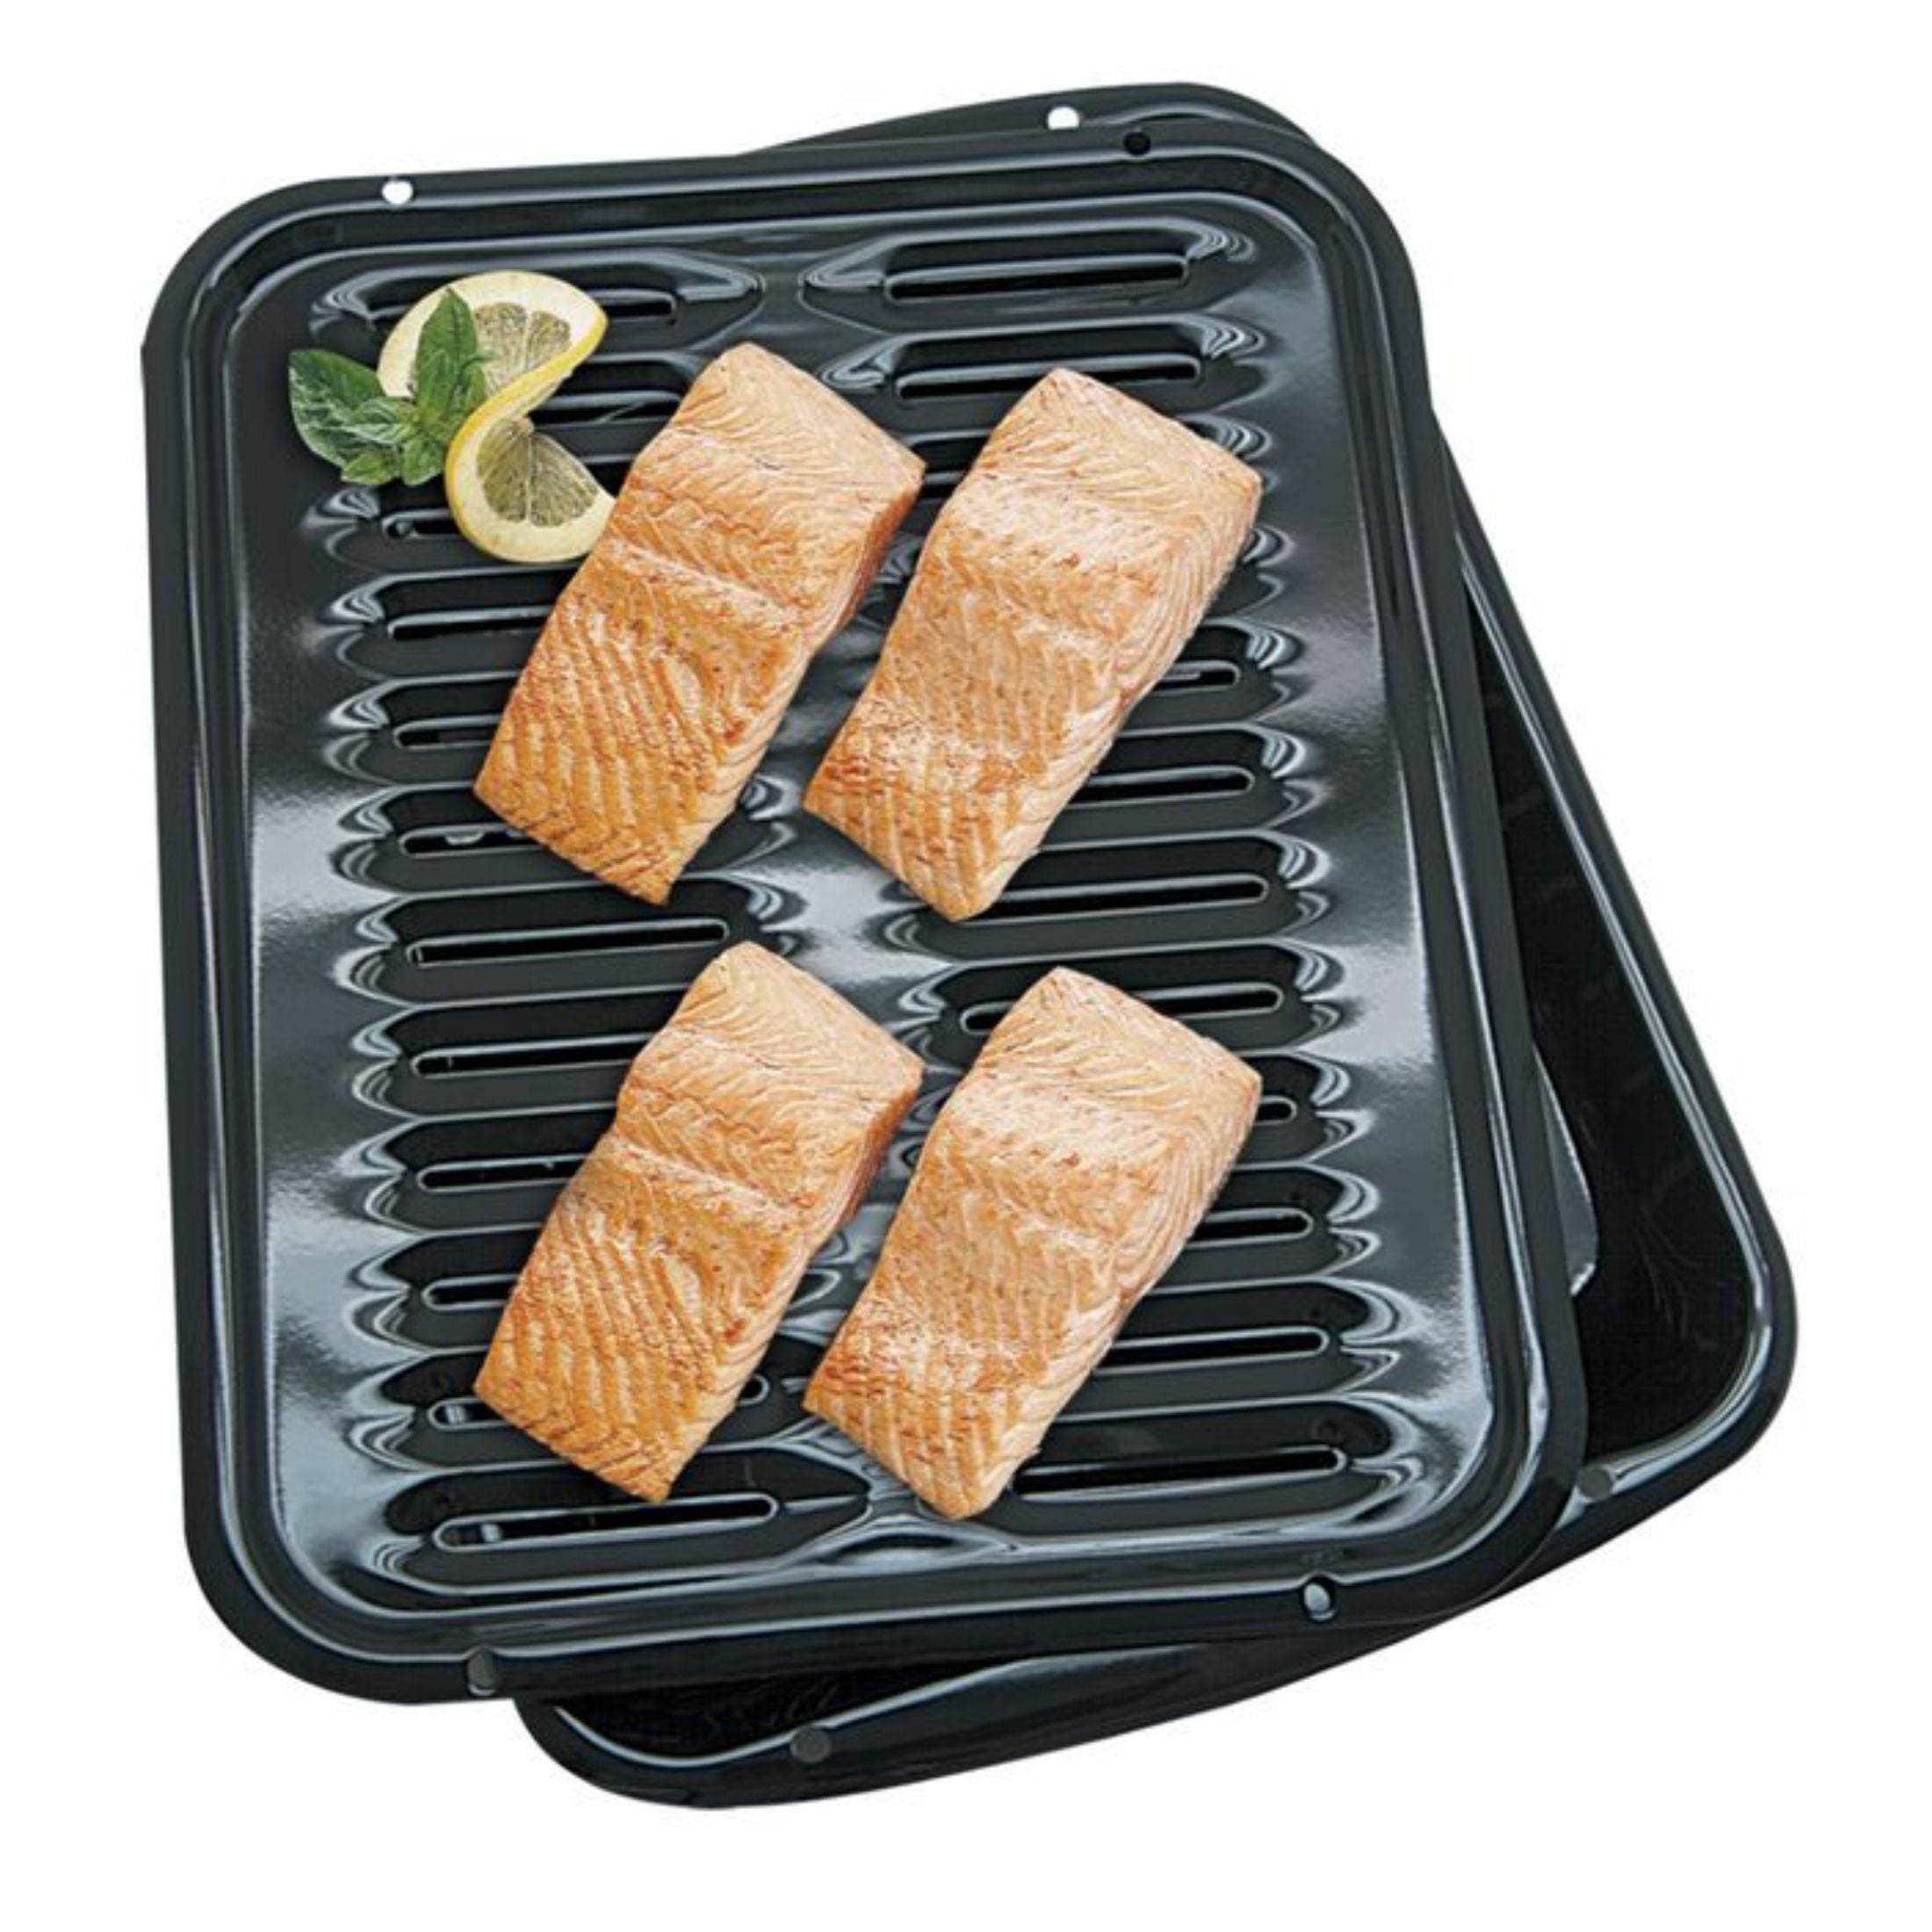 Range Kleen Convection Porcelain Broiler Pan/Grill at Tractor Supply Co.